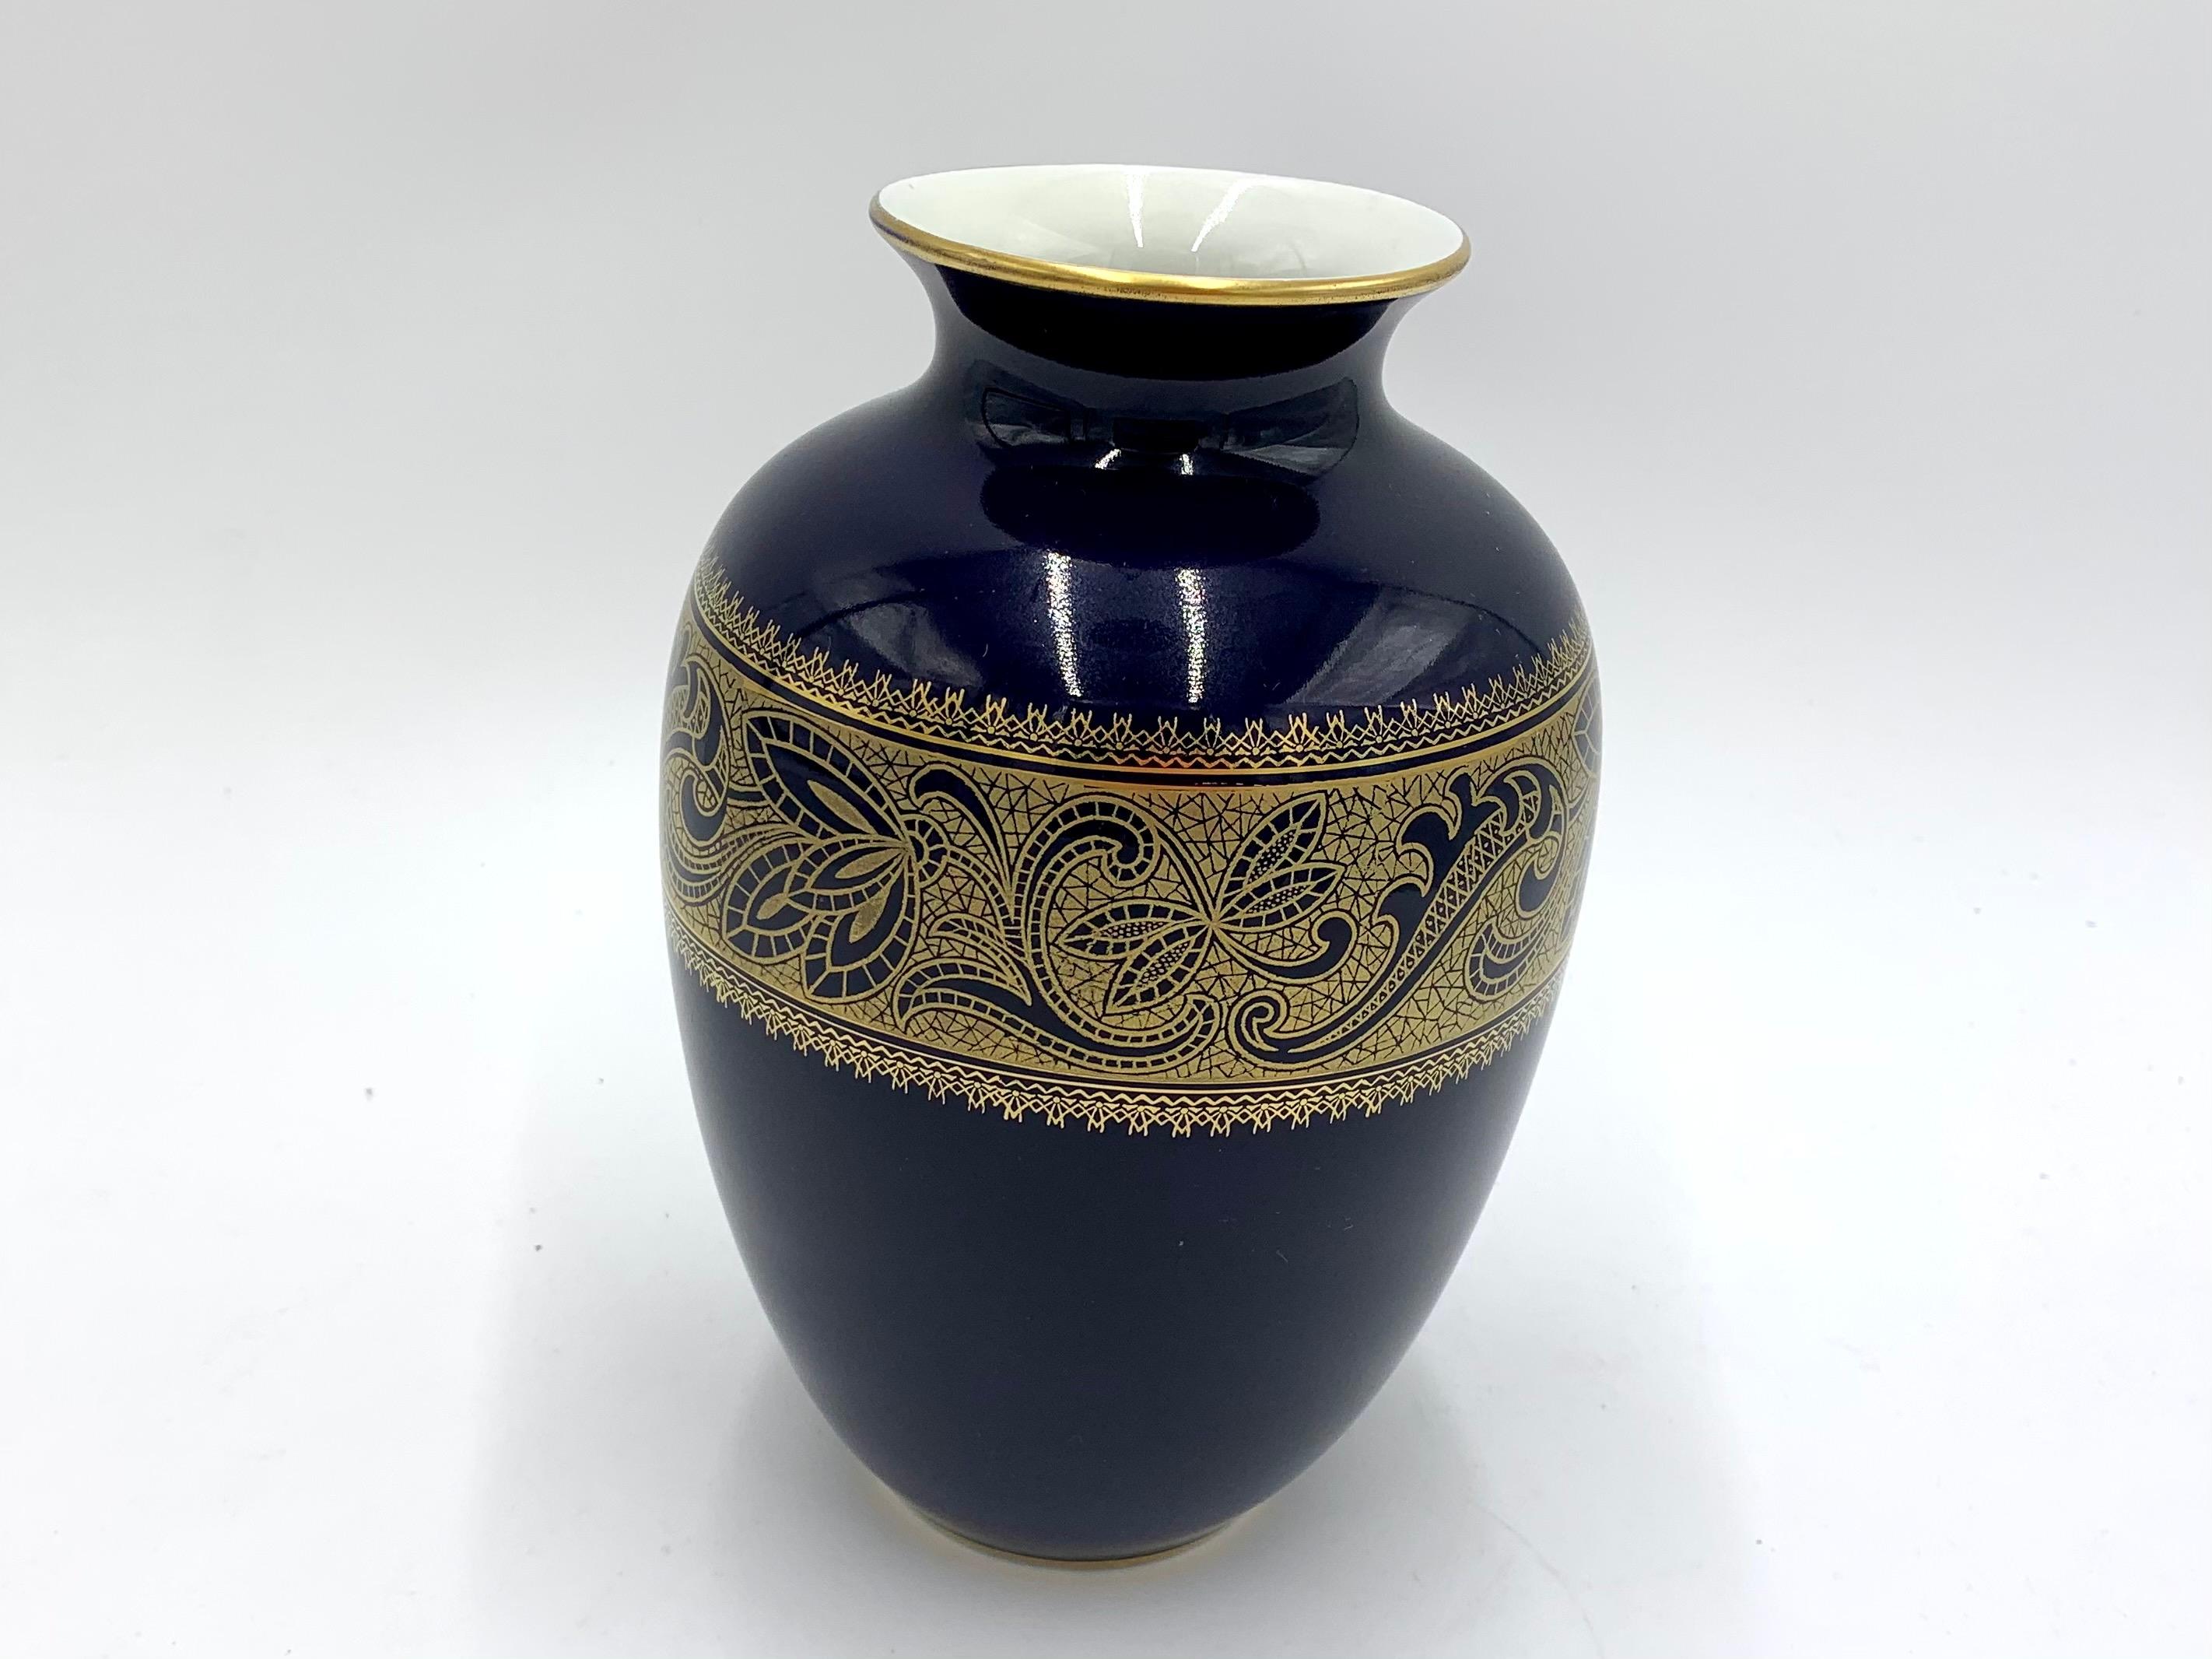 A beautiful porcelain vase in navy blue, hand-decorated with the Echt Cobalt technique.

Signed Royal Porzellan Bavaria KPM.

Very good condition, no damage.

Measures: Height 21cm, diameter 13cm.